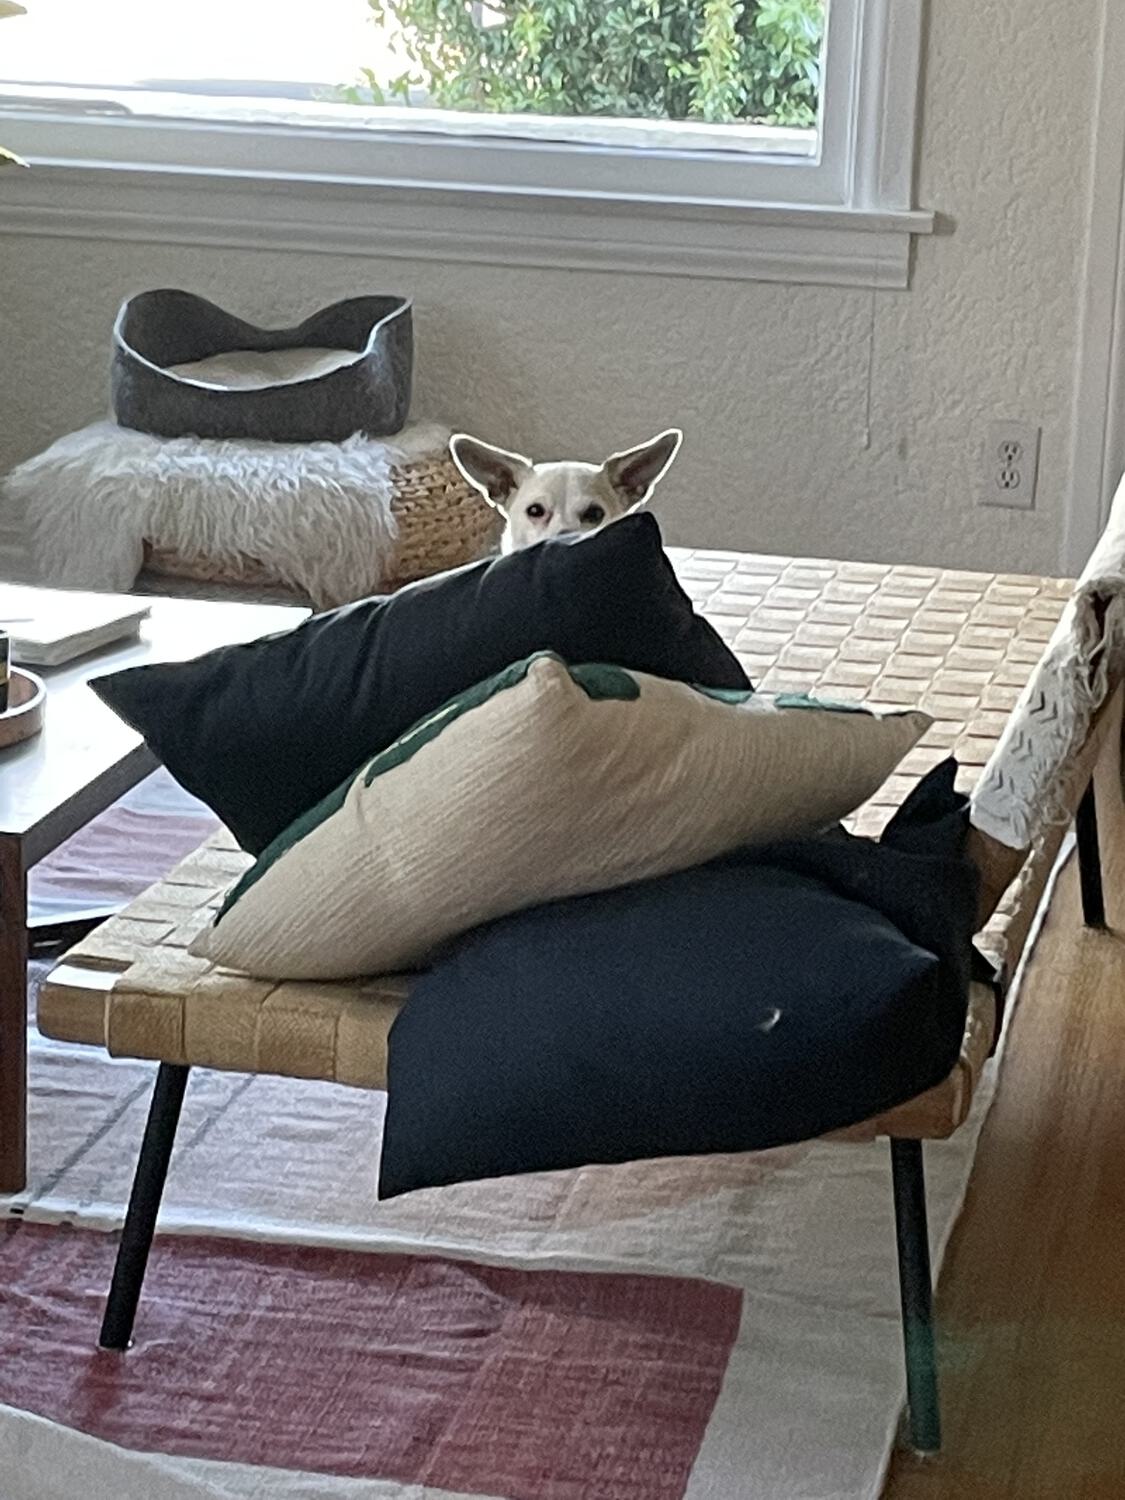 Travis the dog peeking out from behind a pile of pillows that is nearly taller than he is